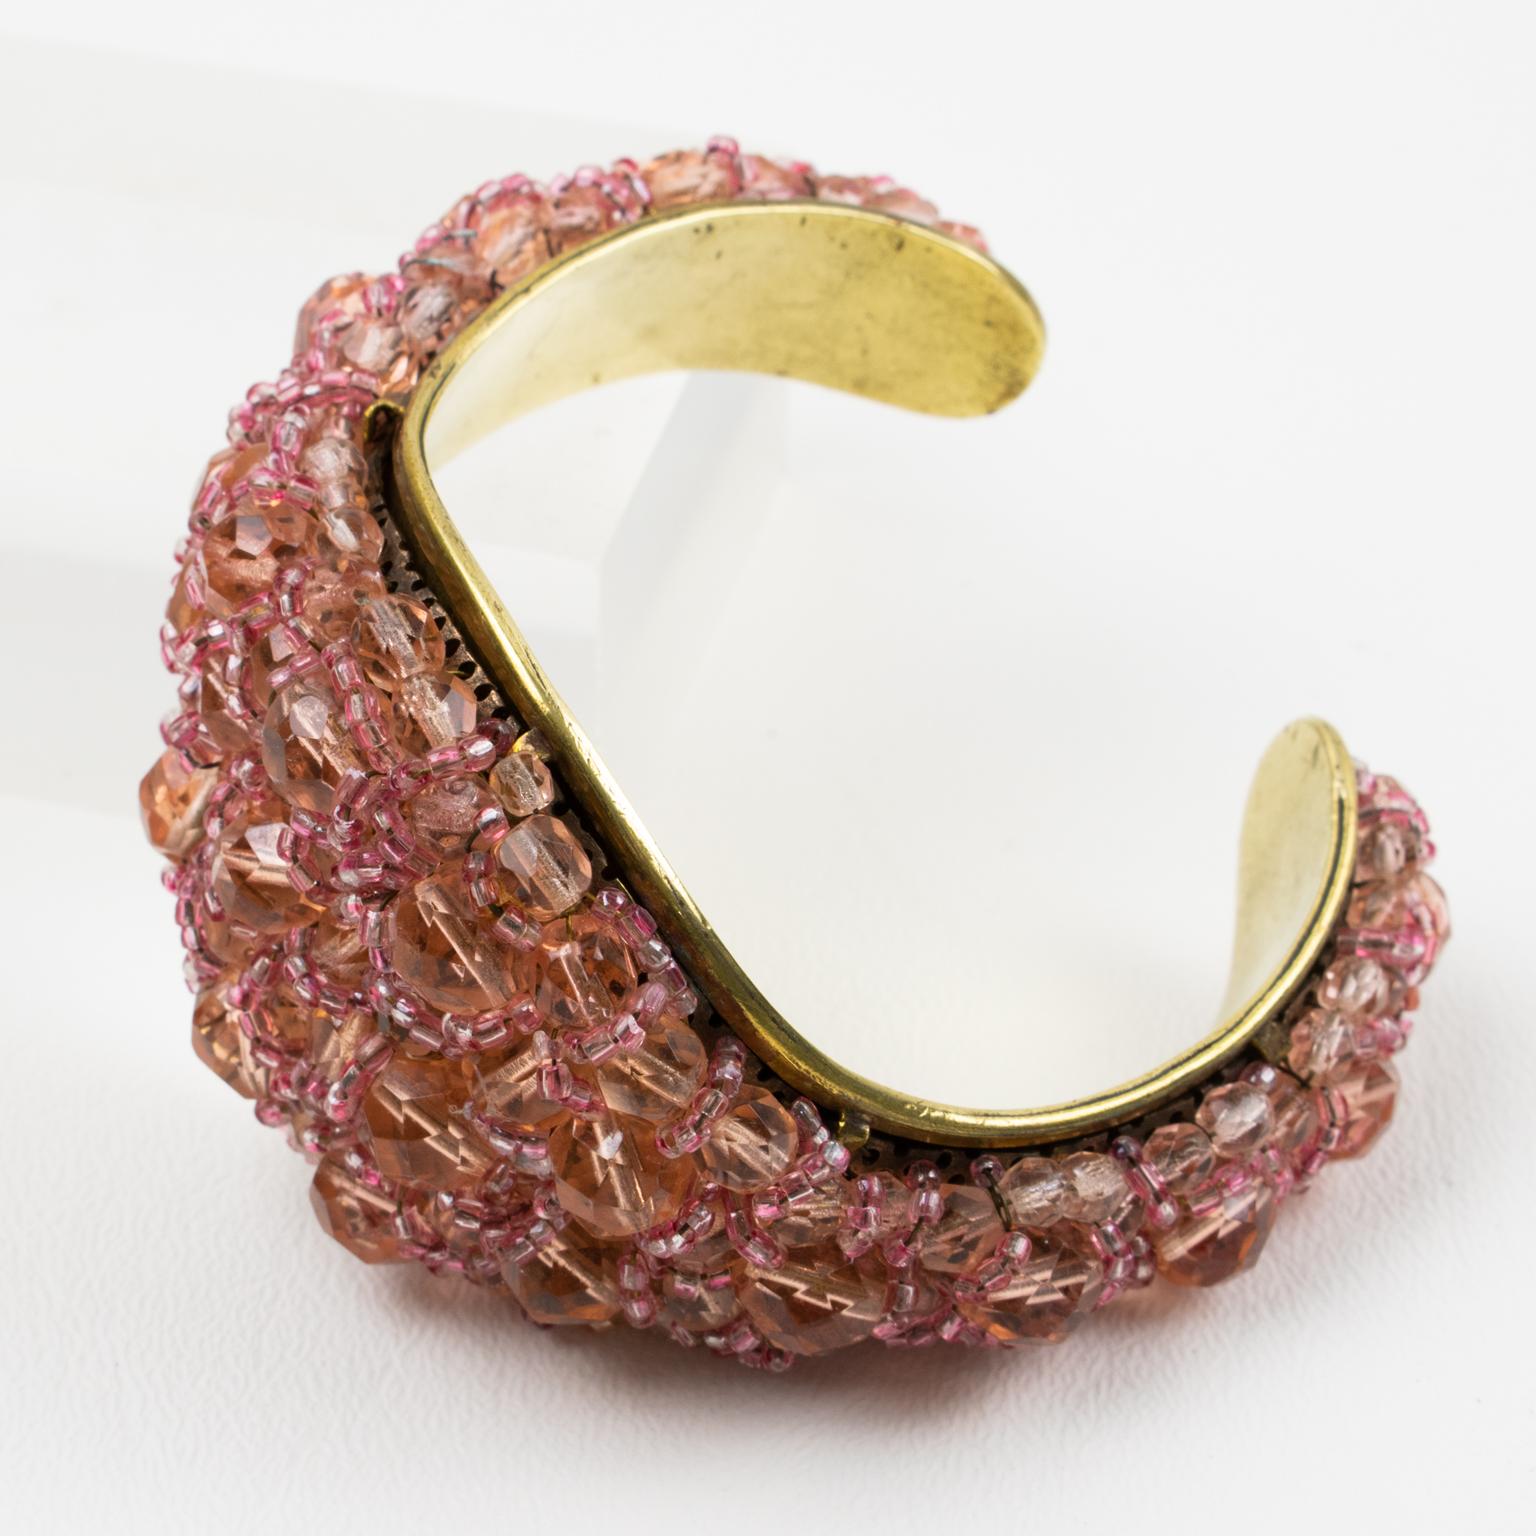 Coppola and Toppo designed this fabulous rare cuff bracelet in the 1950s. The bracelet boasts a brass framing and is ornate with multi-strands of beads brought together to form a striking intricate design. 
As with all of their necklaces and